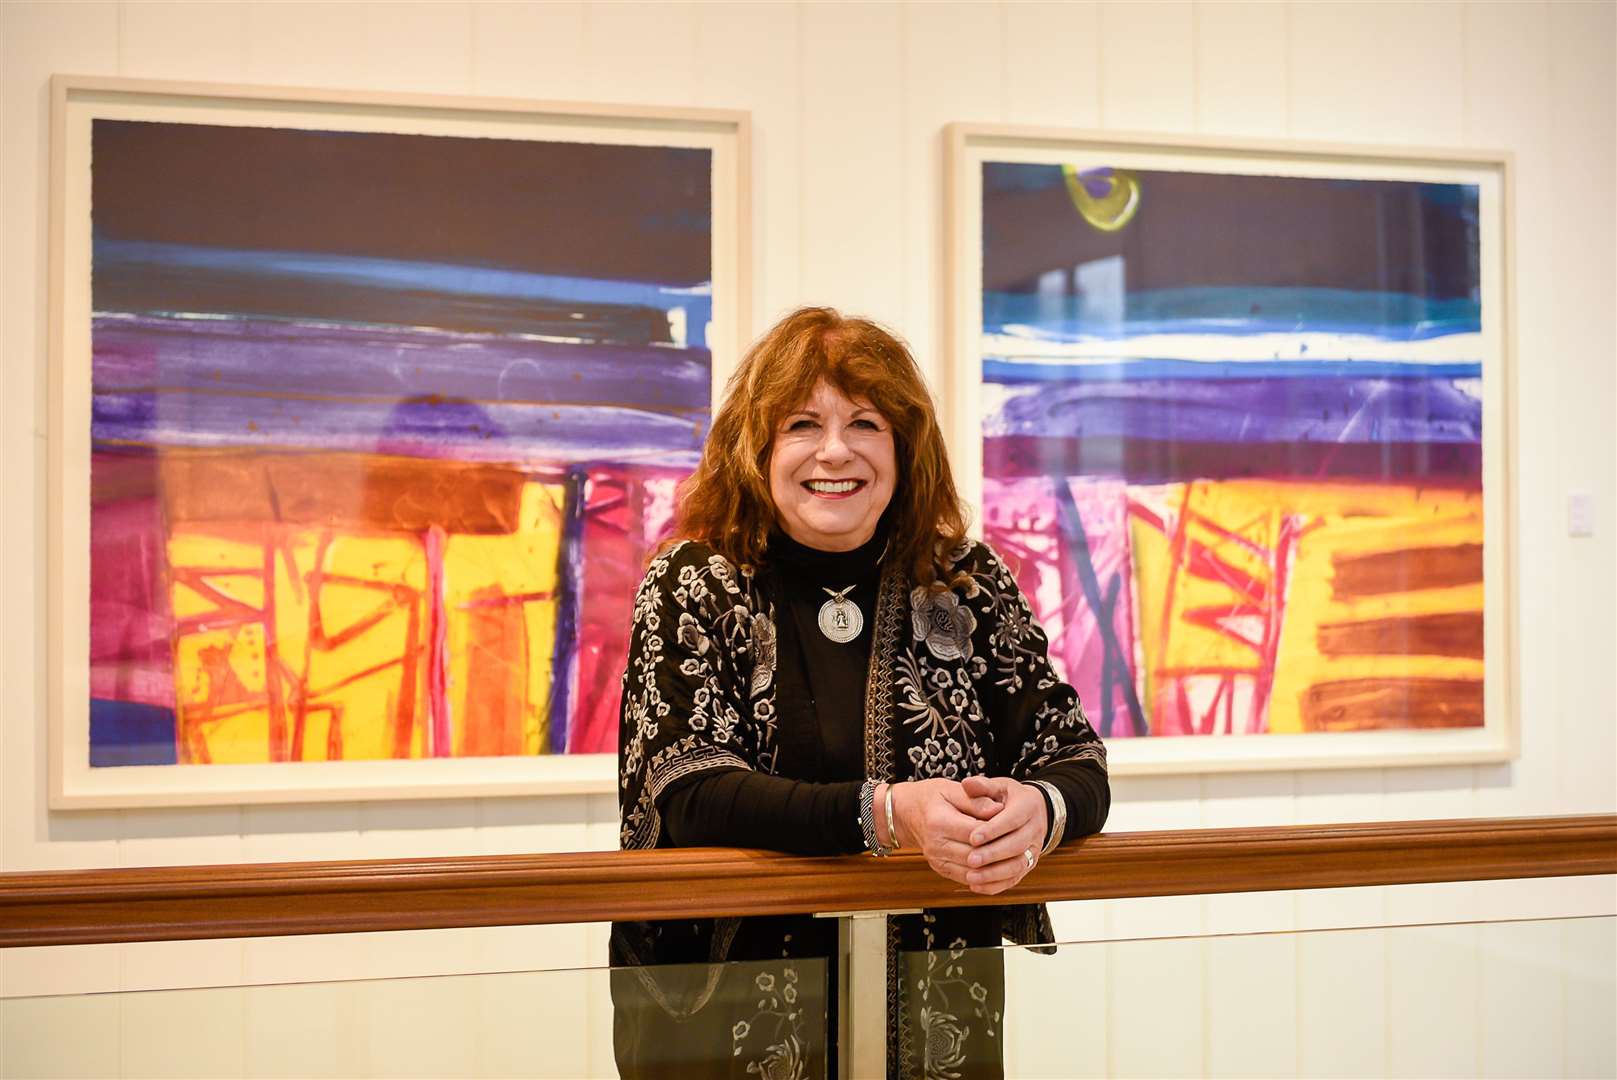 Artist Barbara Rae holds a major art exhibition at Linden Hall Studio in Deal